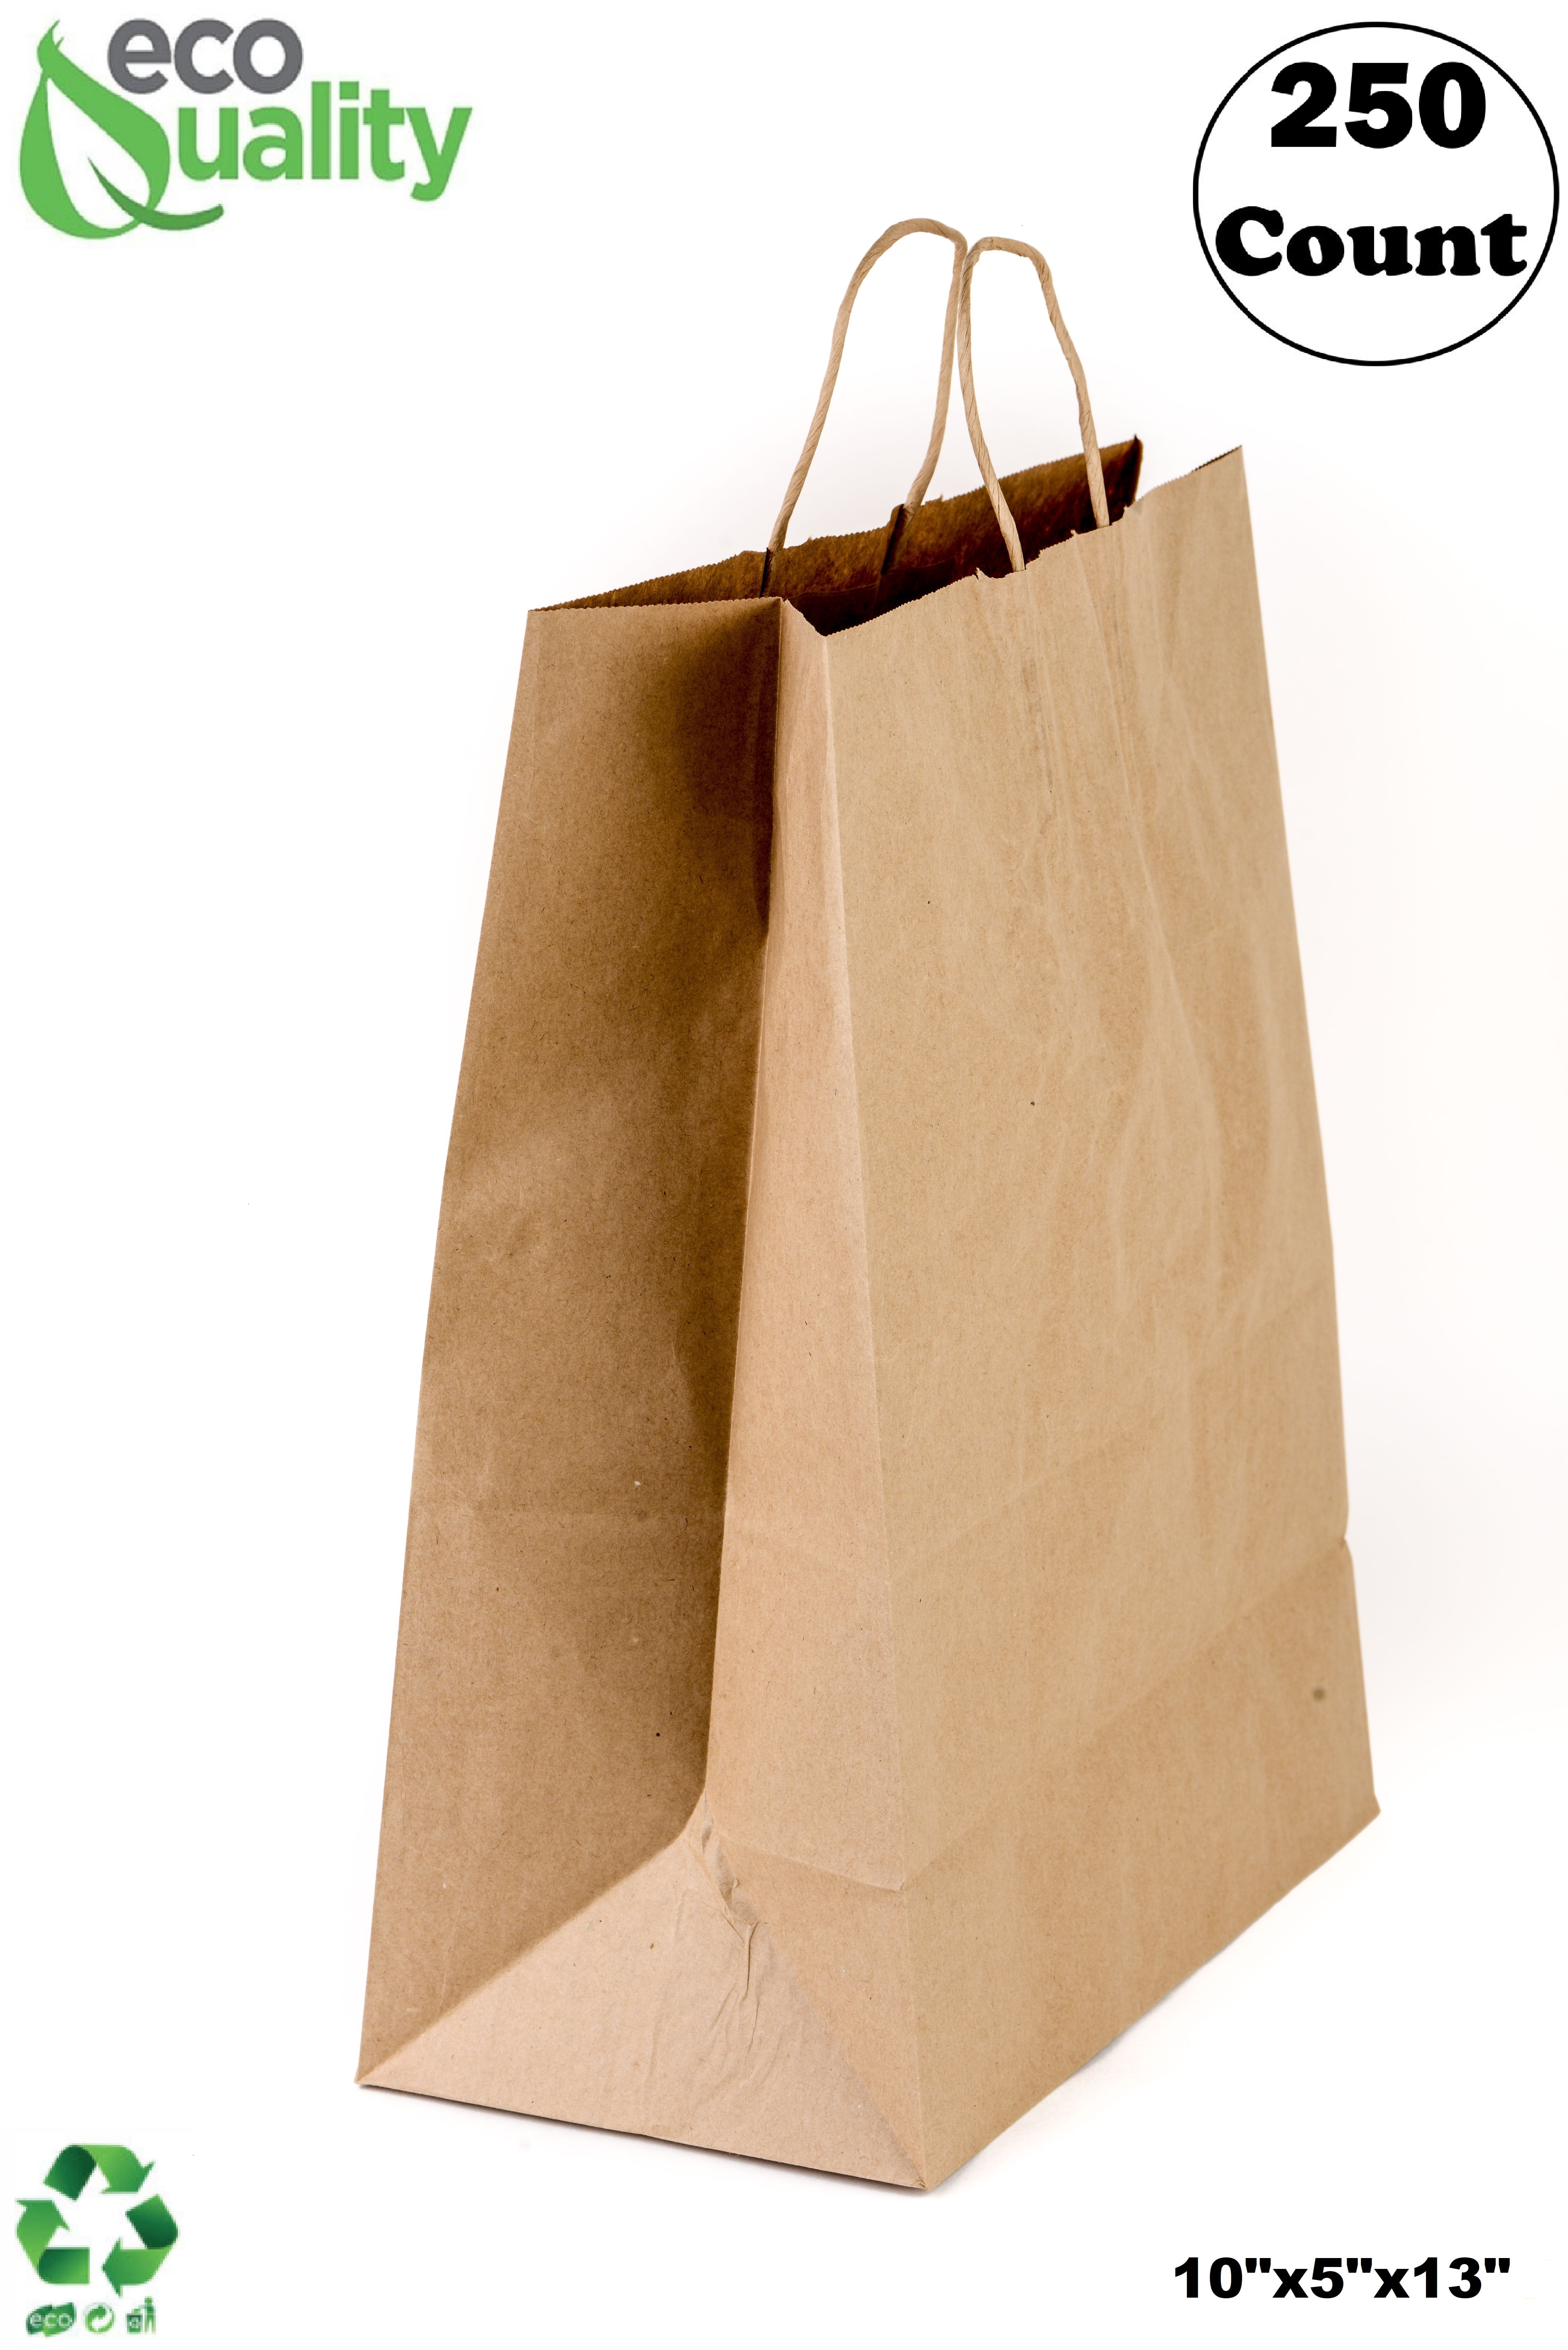 8 x 5 x 10 Kraft Brown Paper Cub Shopping Gift Bags with Rope Handles x 50 pcs 